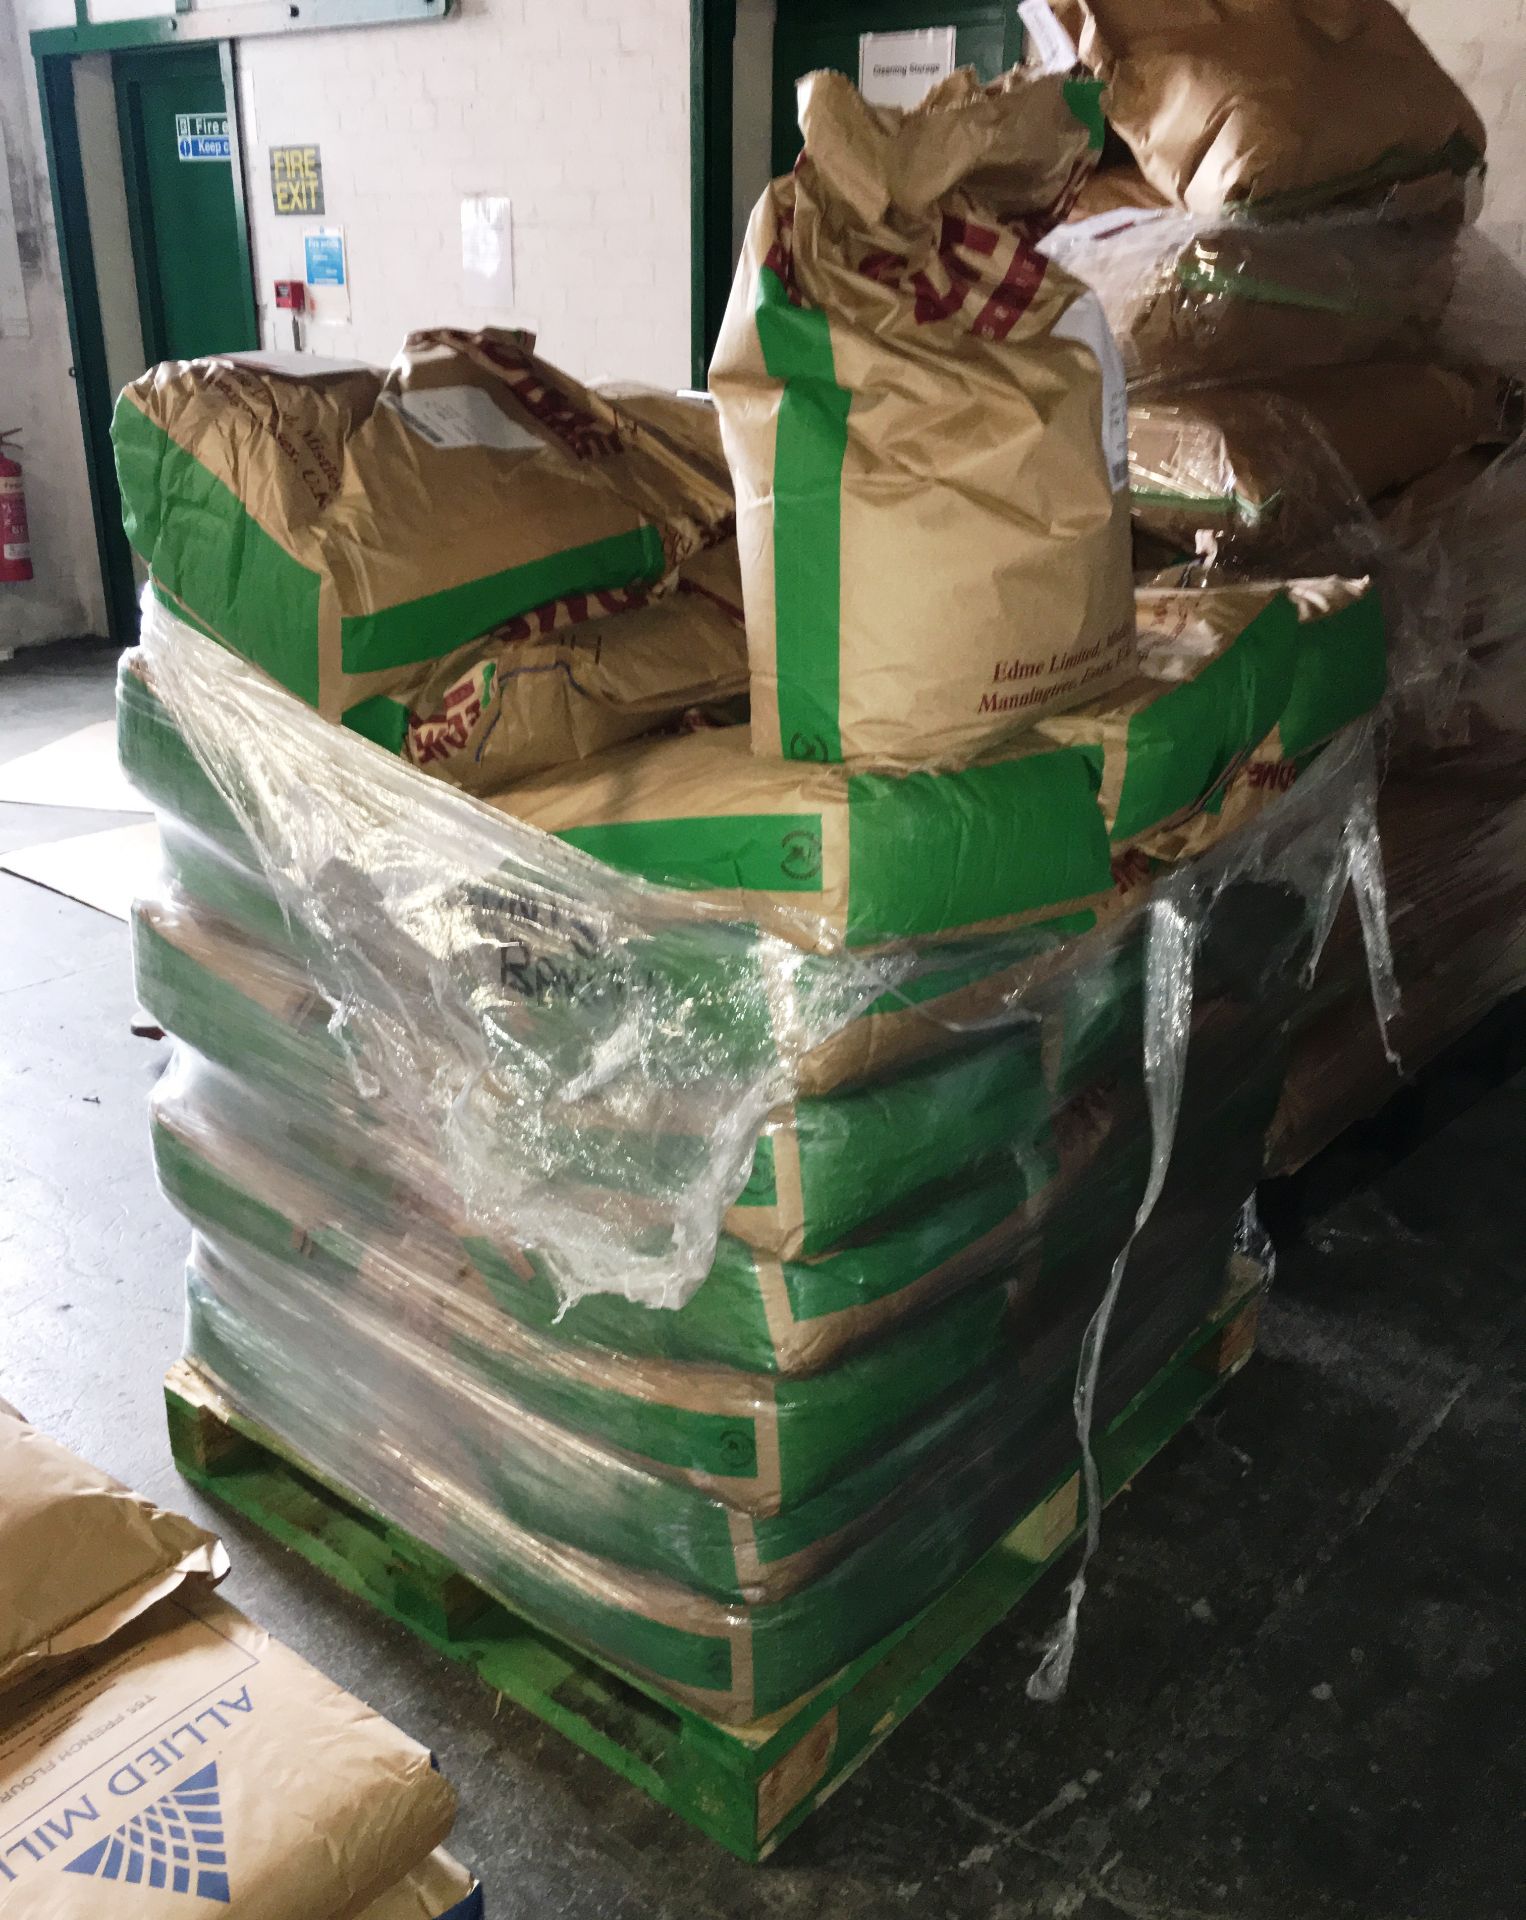 30 x 25kg Bags of G-3 Concentrate